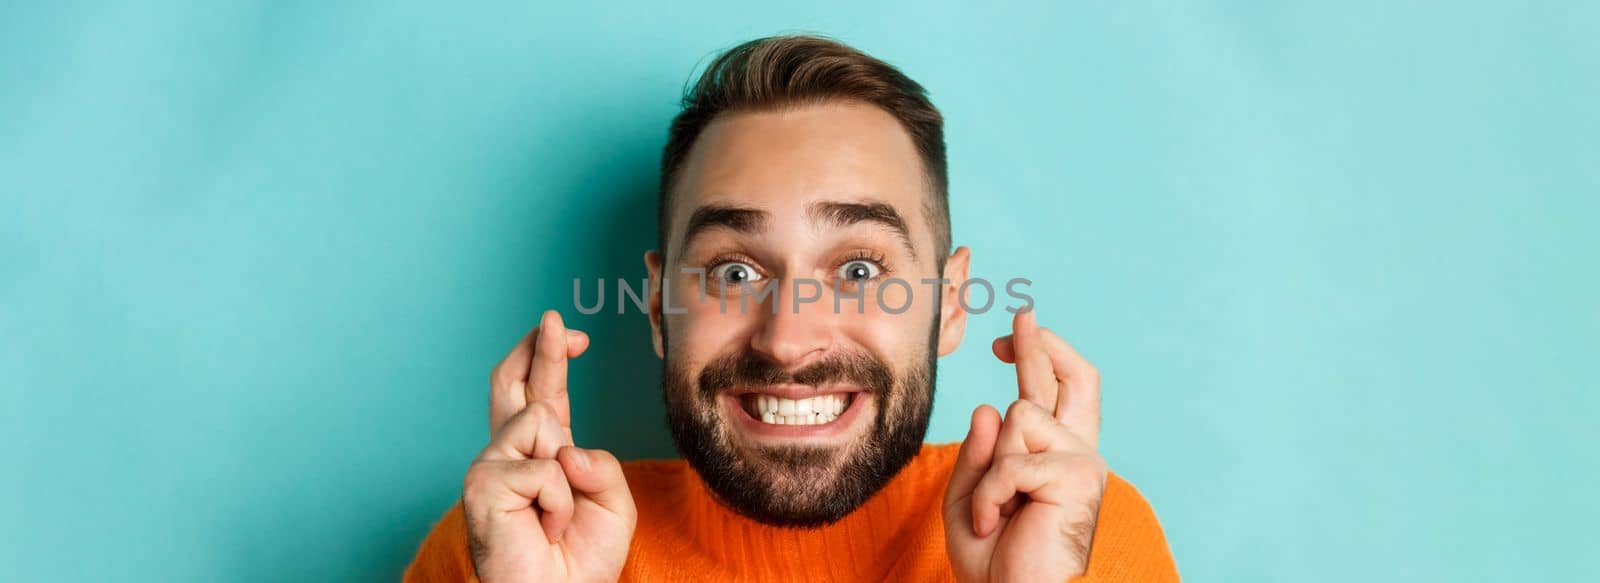 Headshot of hopeful bearded man making a wish, smiling and holding fingers crossed for good luck, standing over light blue background.